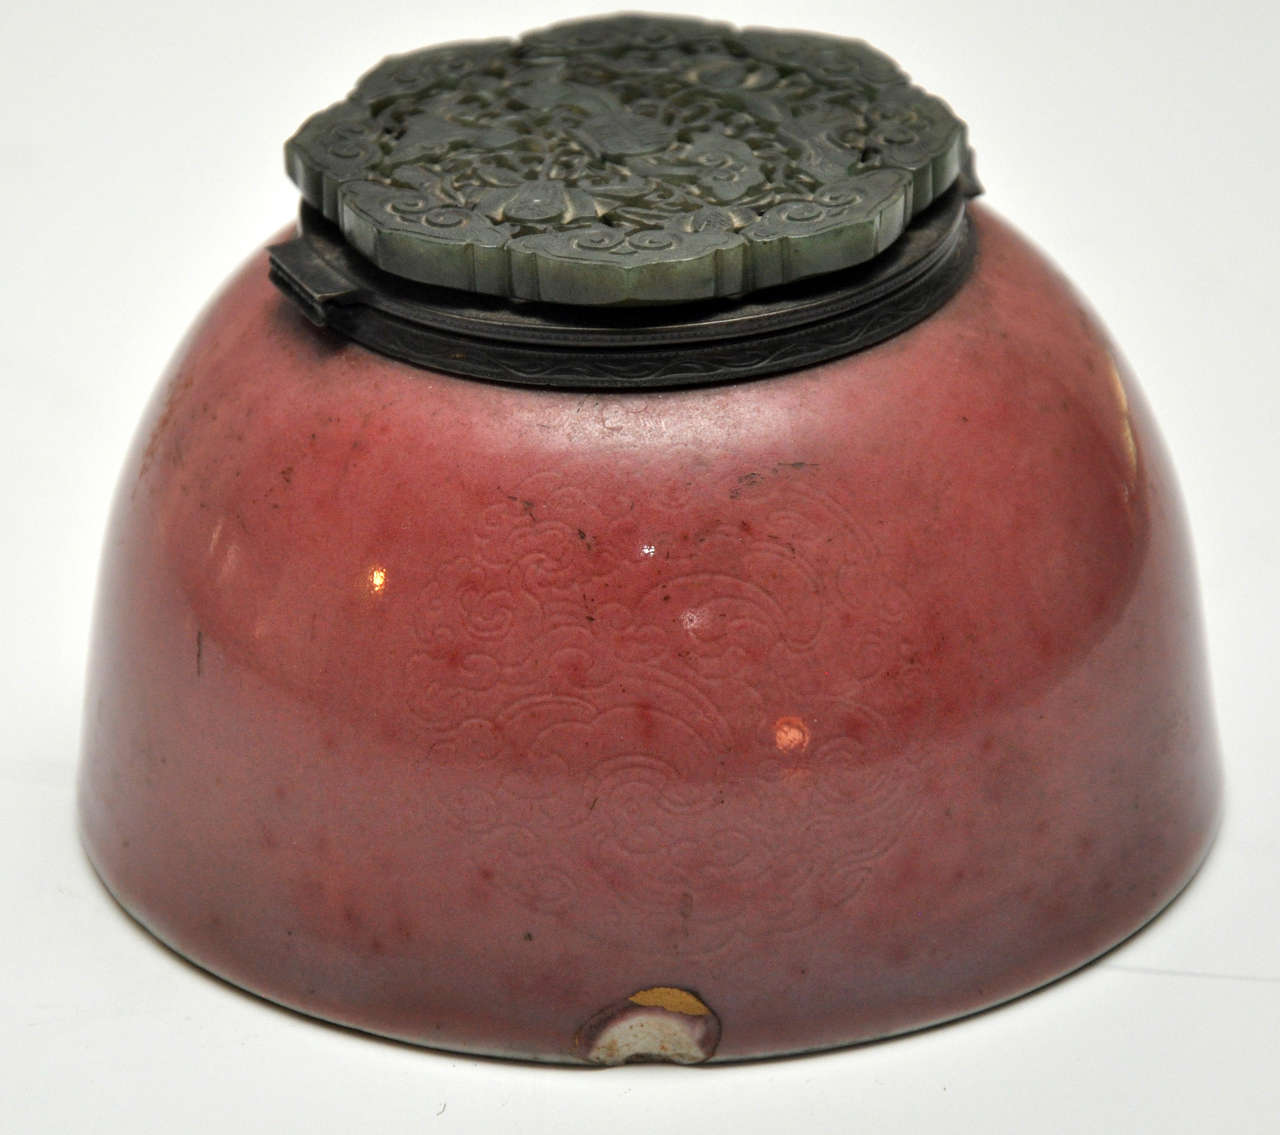 Jade Chinese Porcelain Brush Pot Now Mounted as an Inkwell, circa 1661-1722